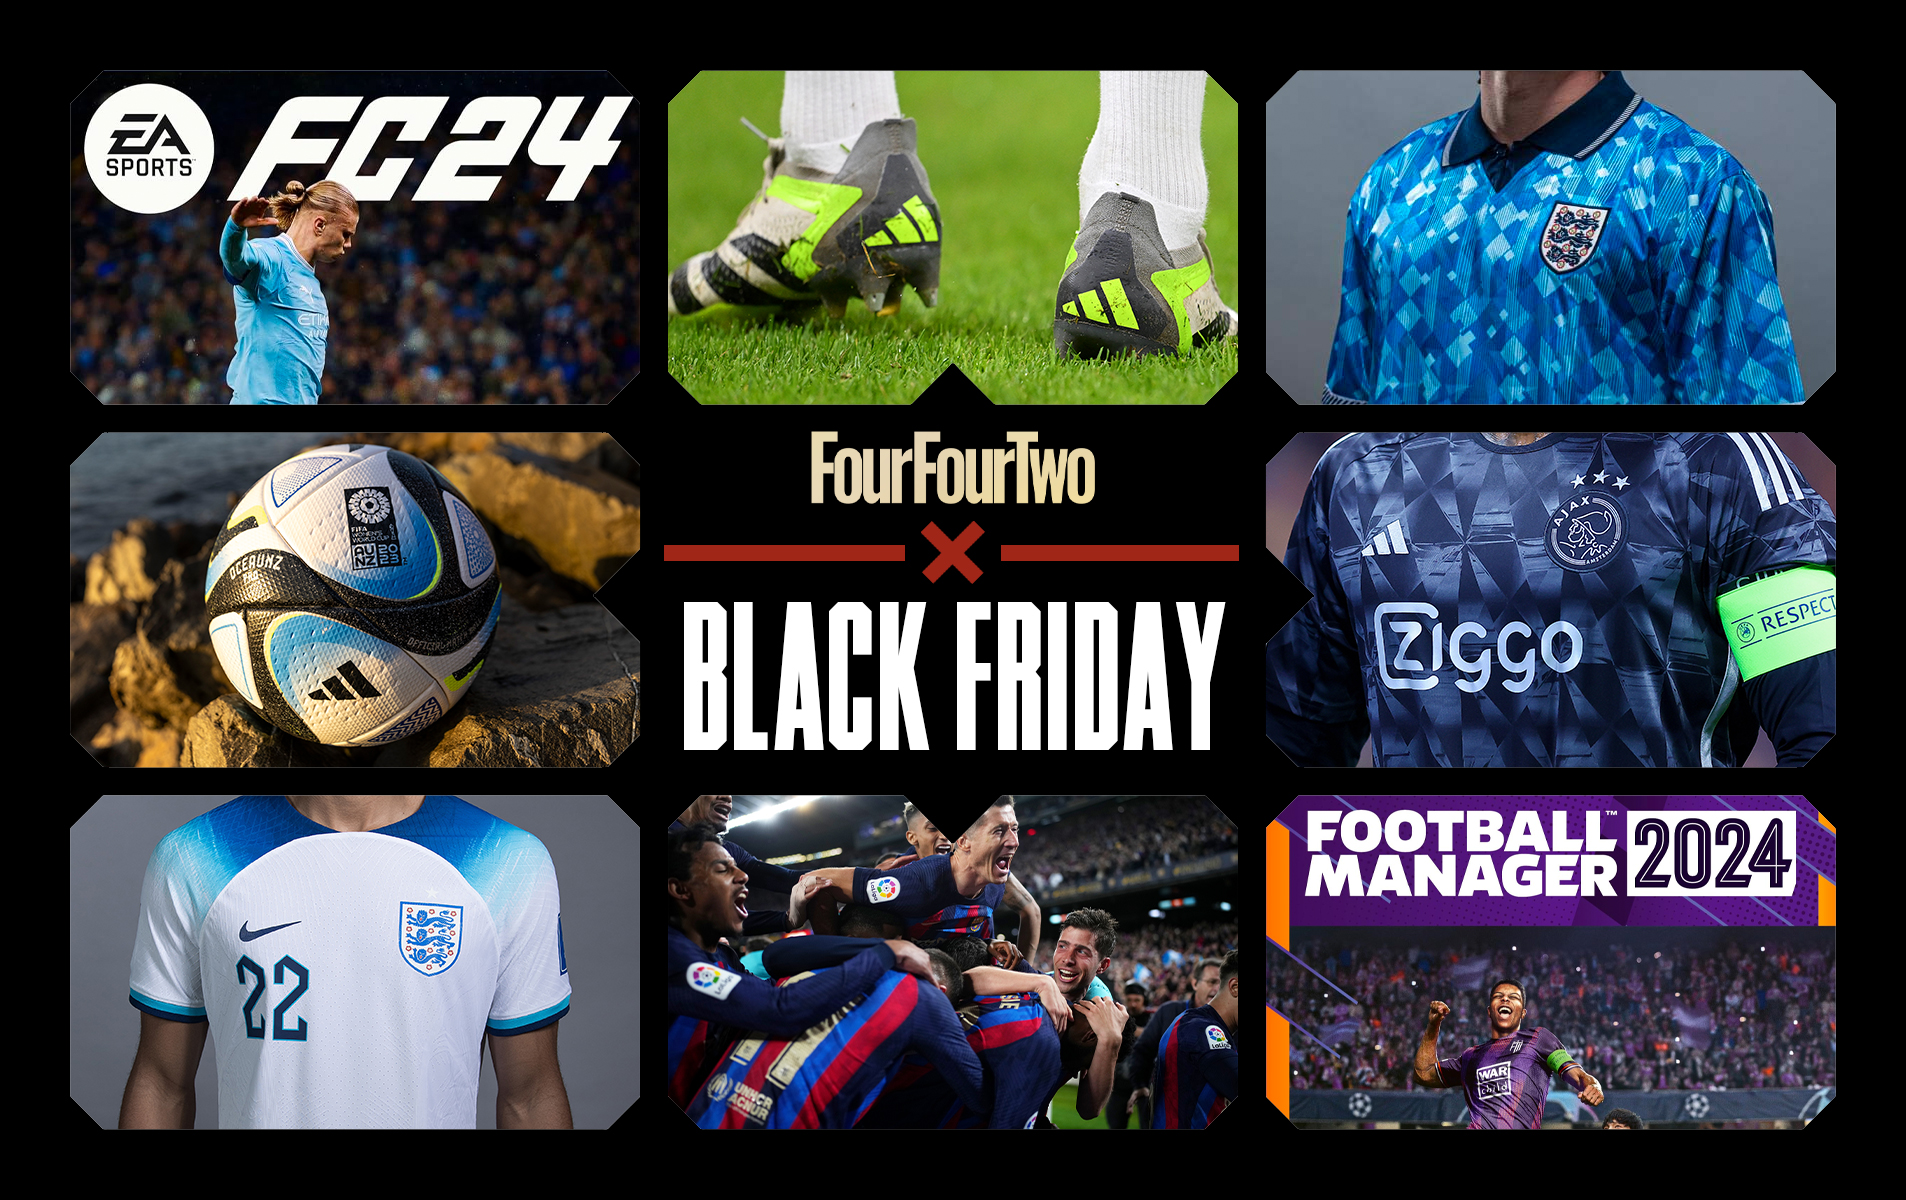 New FC 24 Prime Gaming pack gives out a free Tottenham Hotspur star